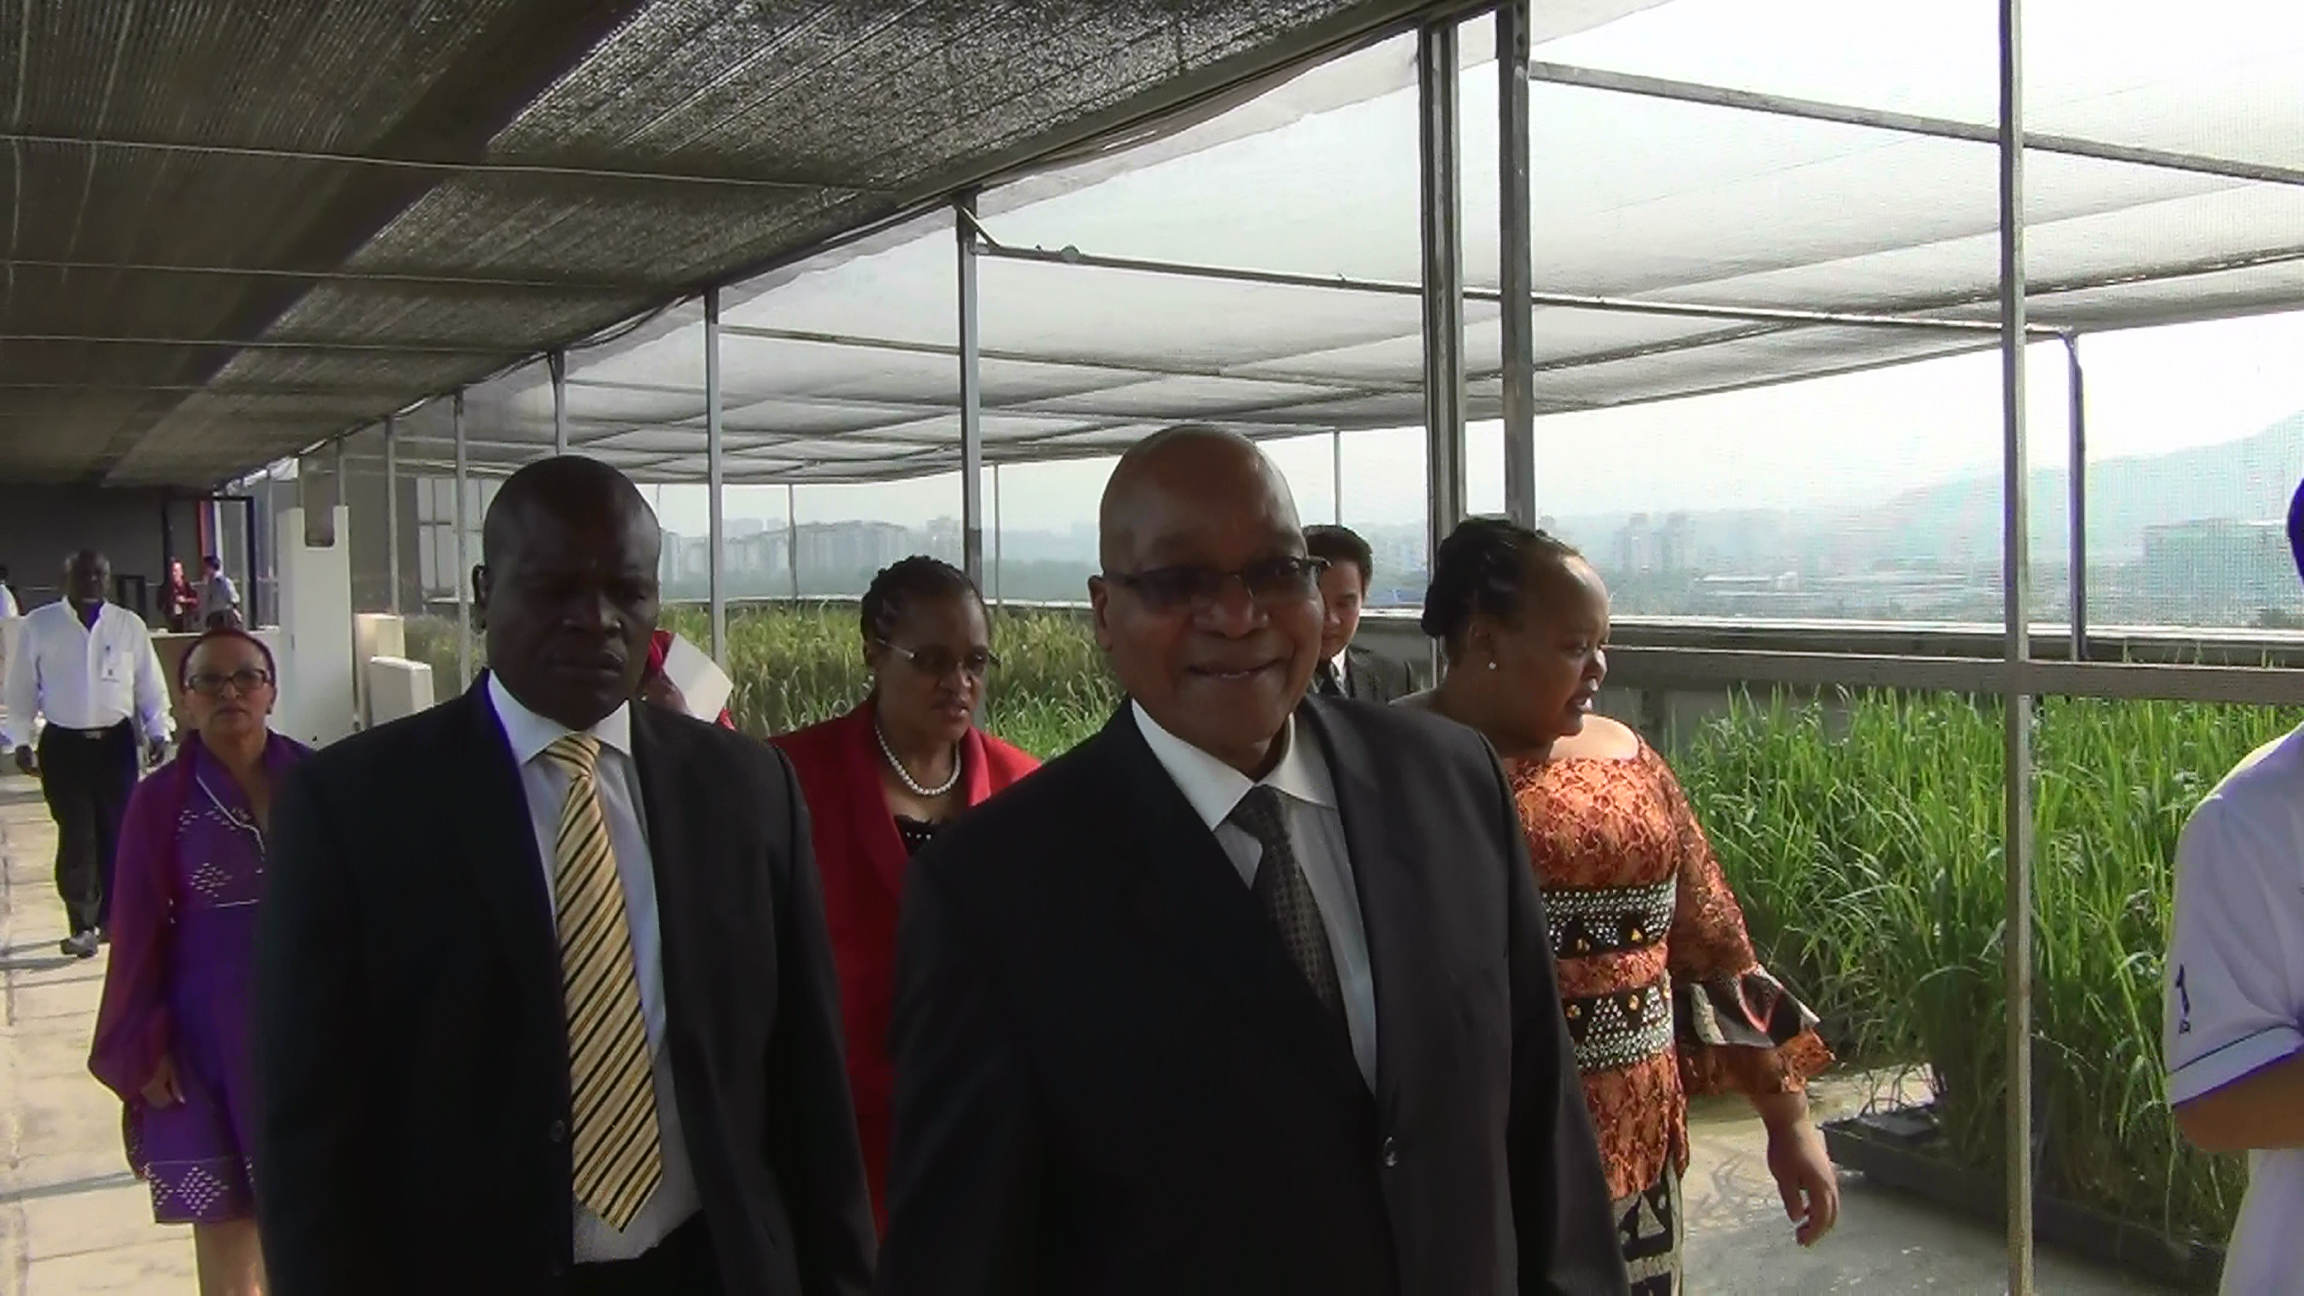 President Of South Africa Visits Rooftop Farm